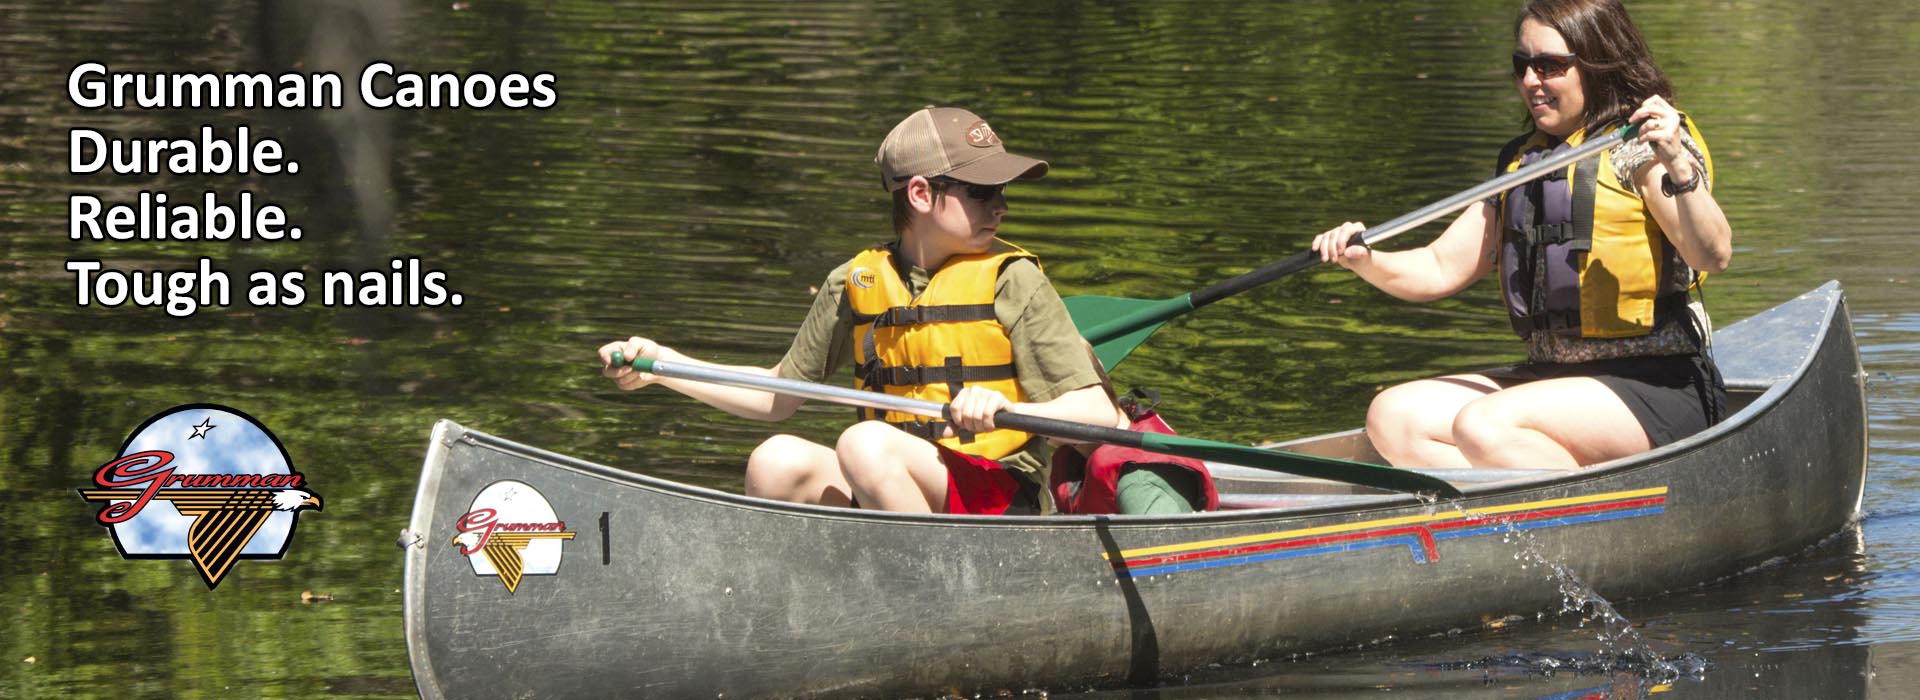 Grumman Canoes - Durable. Reliable. Tough as nails. Image shows a pre-teen white child with a hat and an adult white woman with brown shoulder length hair. Both are wearing yellow flotation vests, green canoe paddles, and are sitting in a grey Grumman canoe. The child is looking over their left shoulder back towards the adult. Water is trailing off of their canoe paddle indicating movement of the paddle